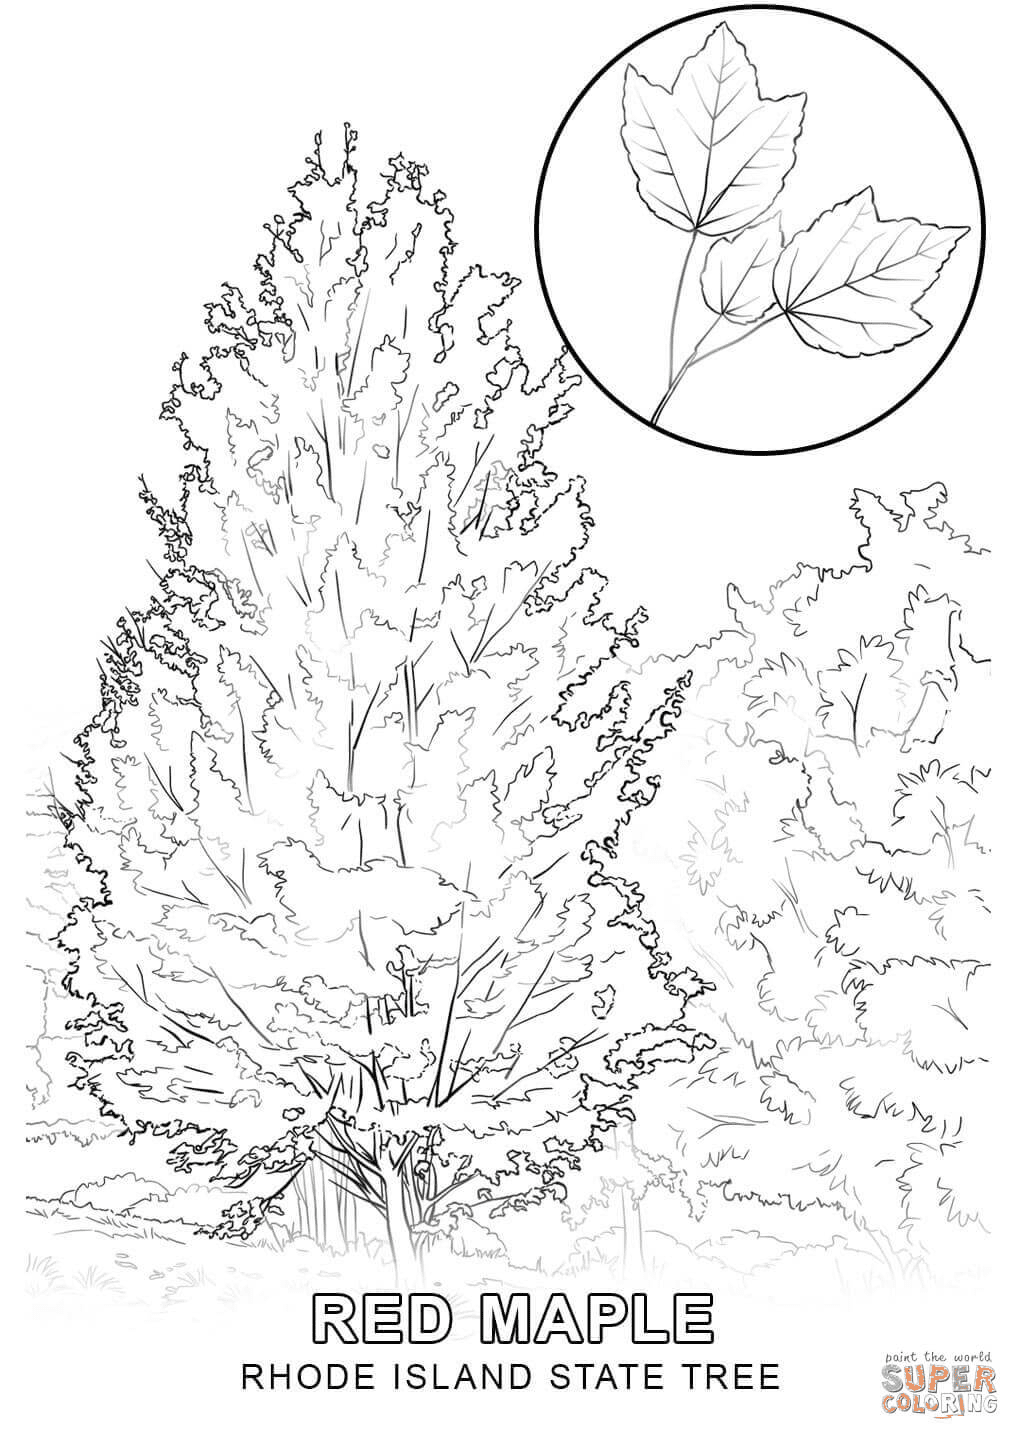 Rhode Island State Tree Coloring Page